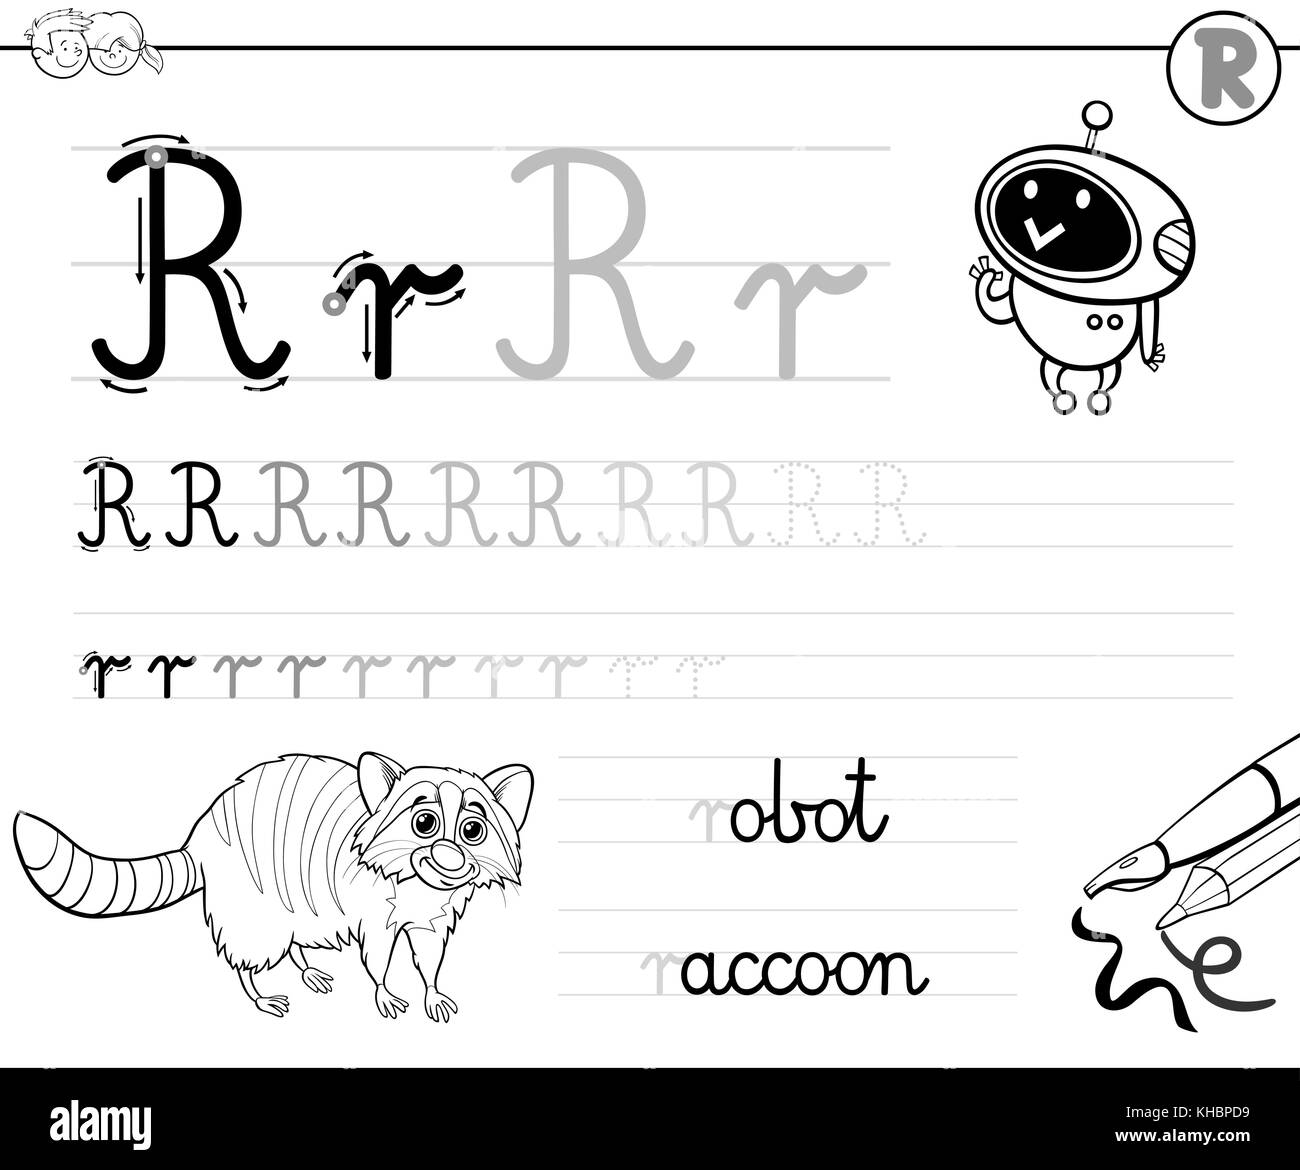 Black and White Cartoon Illustration of Writing Skills Practice with Letter R Worksheet for Preschool and Elementary Age Children Coloring Book Stock Vector